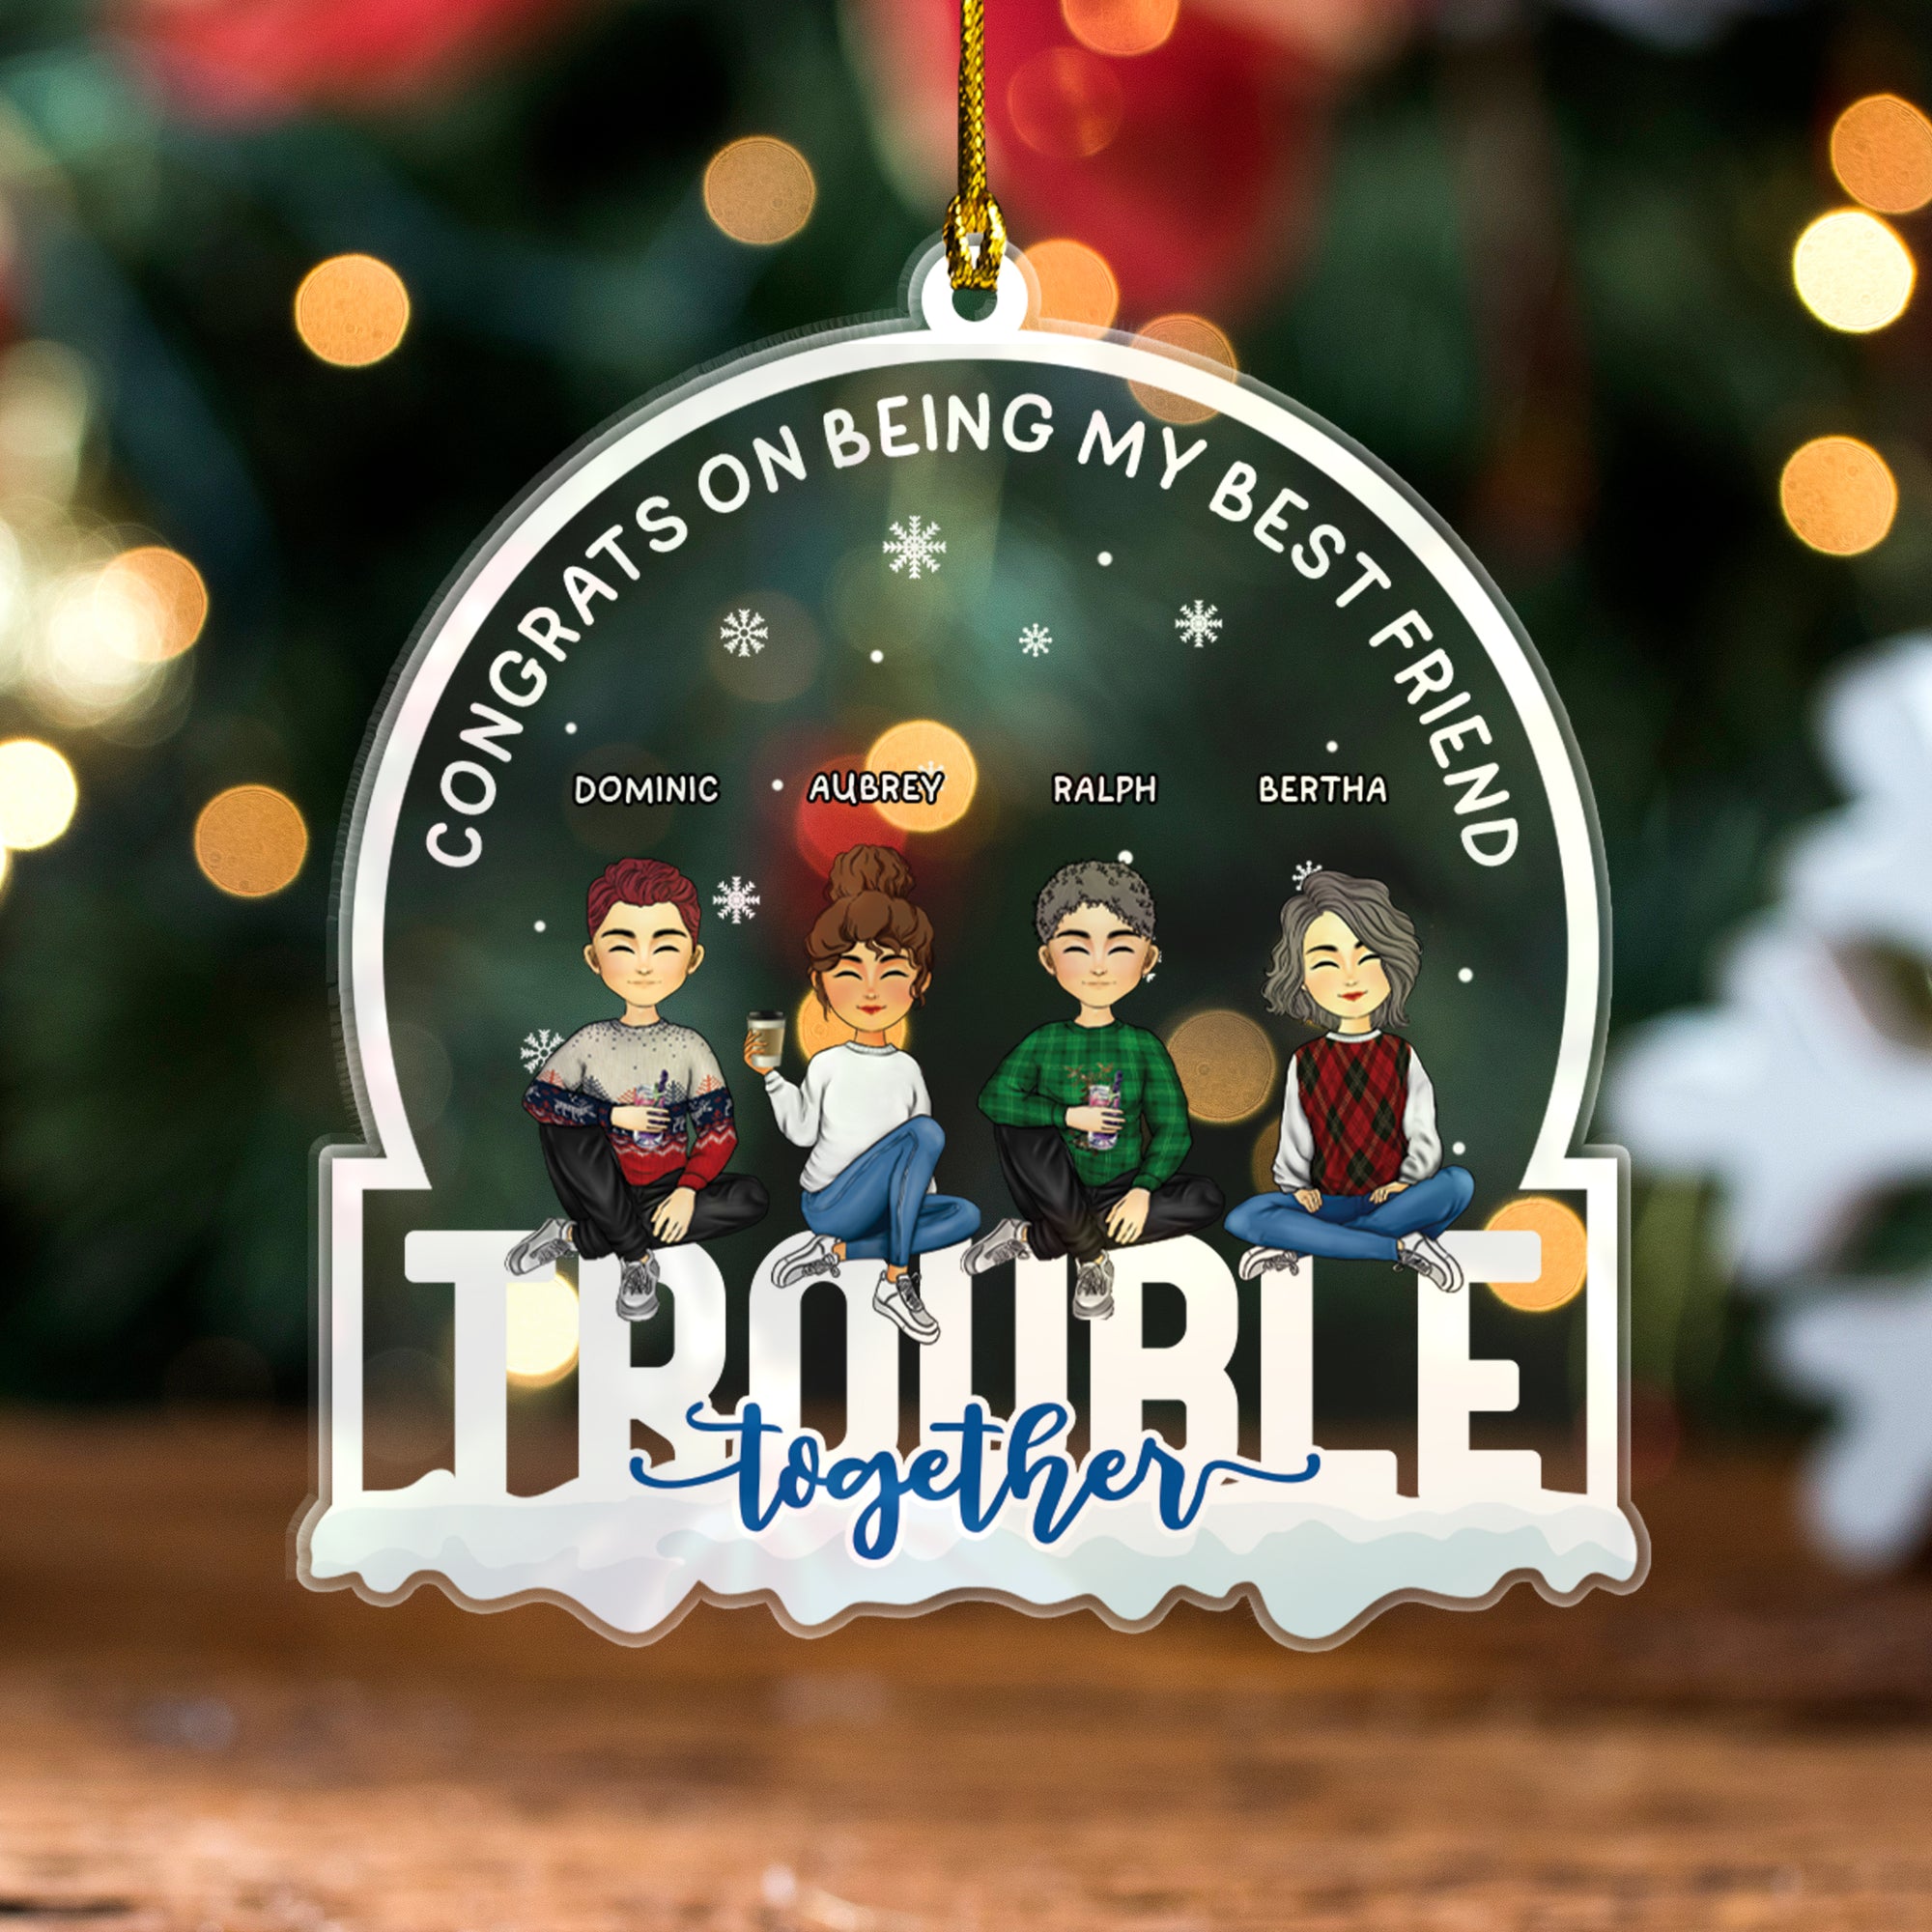 Congrats On Being My Best Friend Trouble Together - Personalized Custom Shape Acrylic Ornament